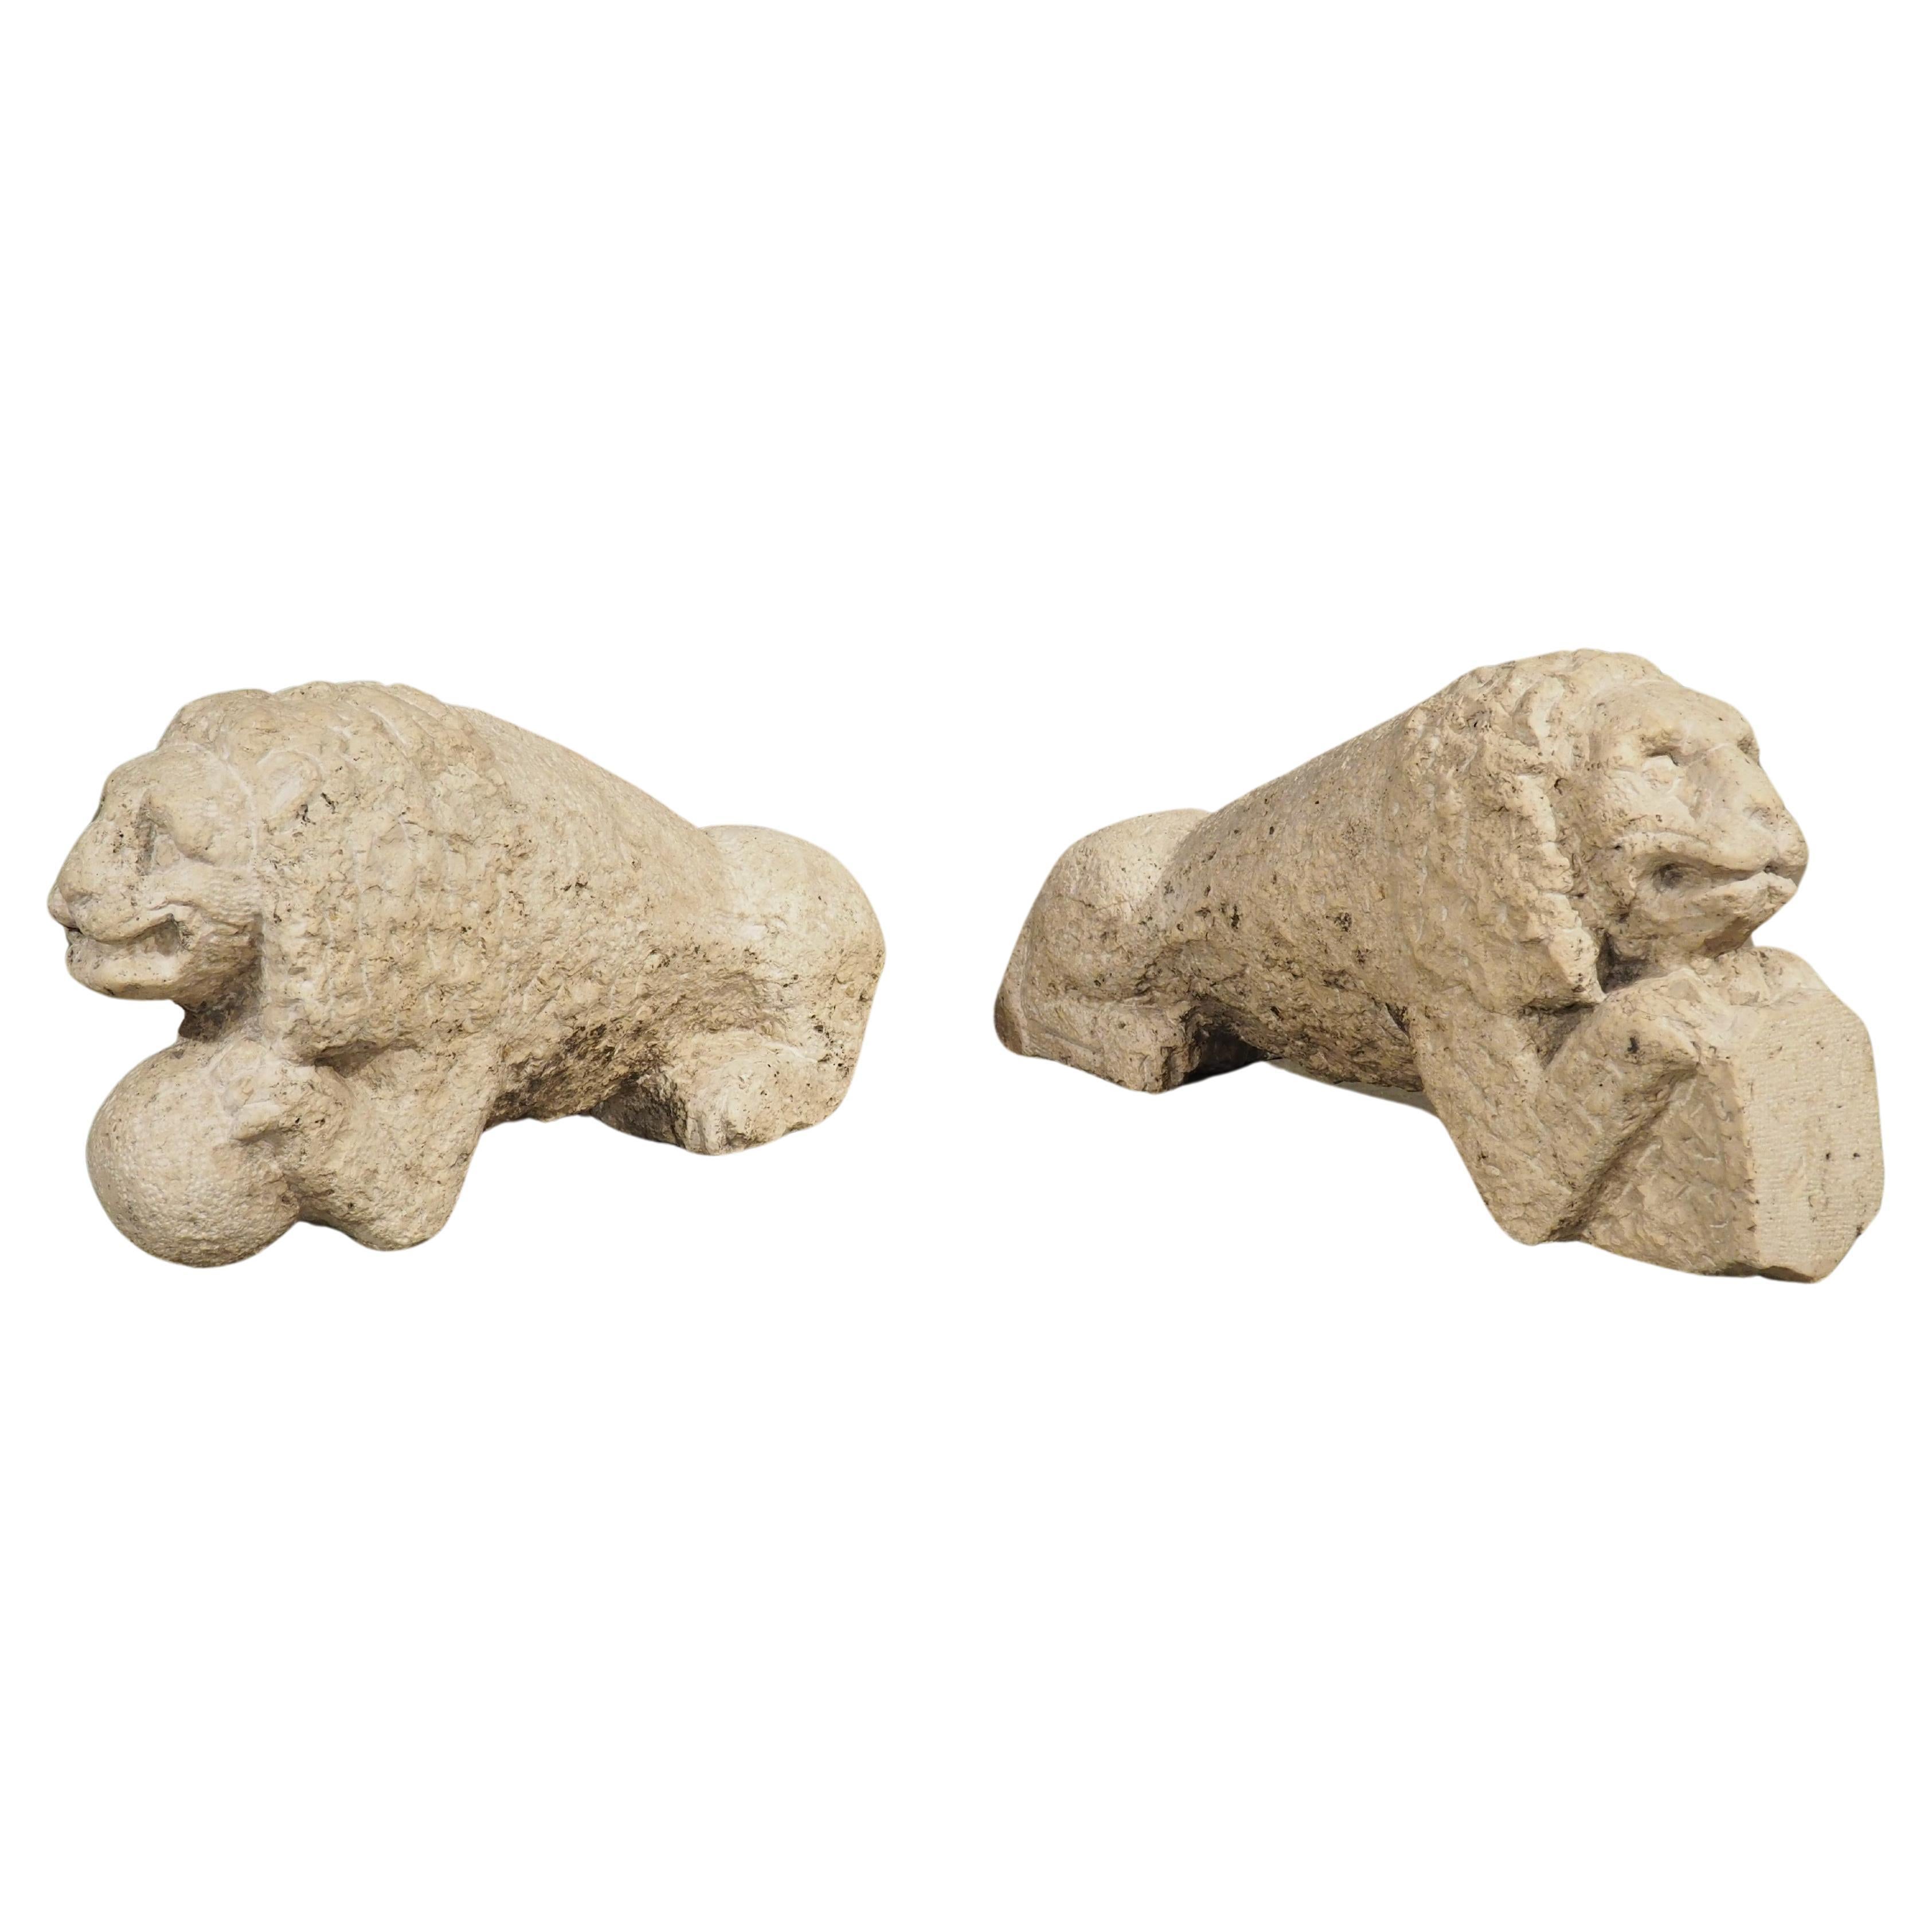 Rare Pair of Antique Carved Stone Lions from Italy, Circa 1600 For Sale